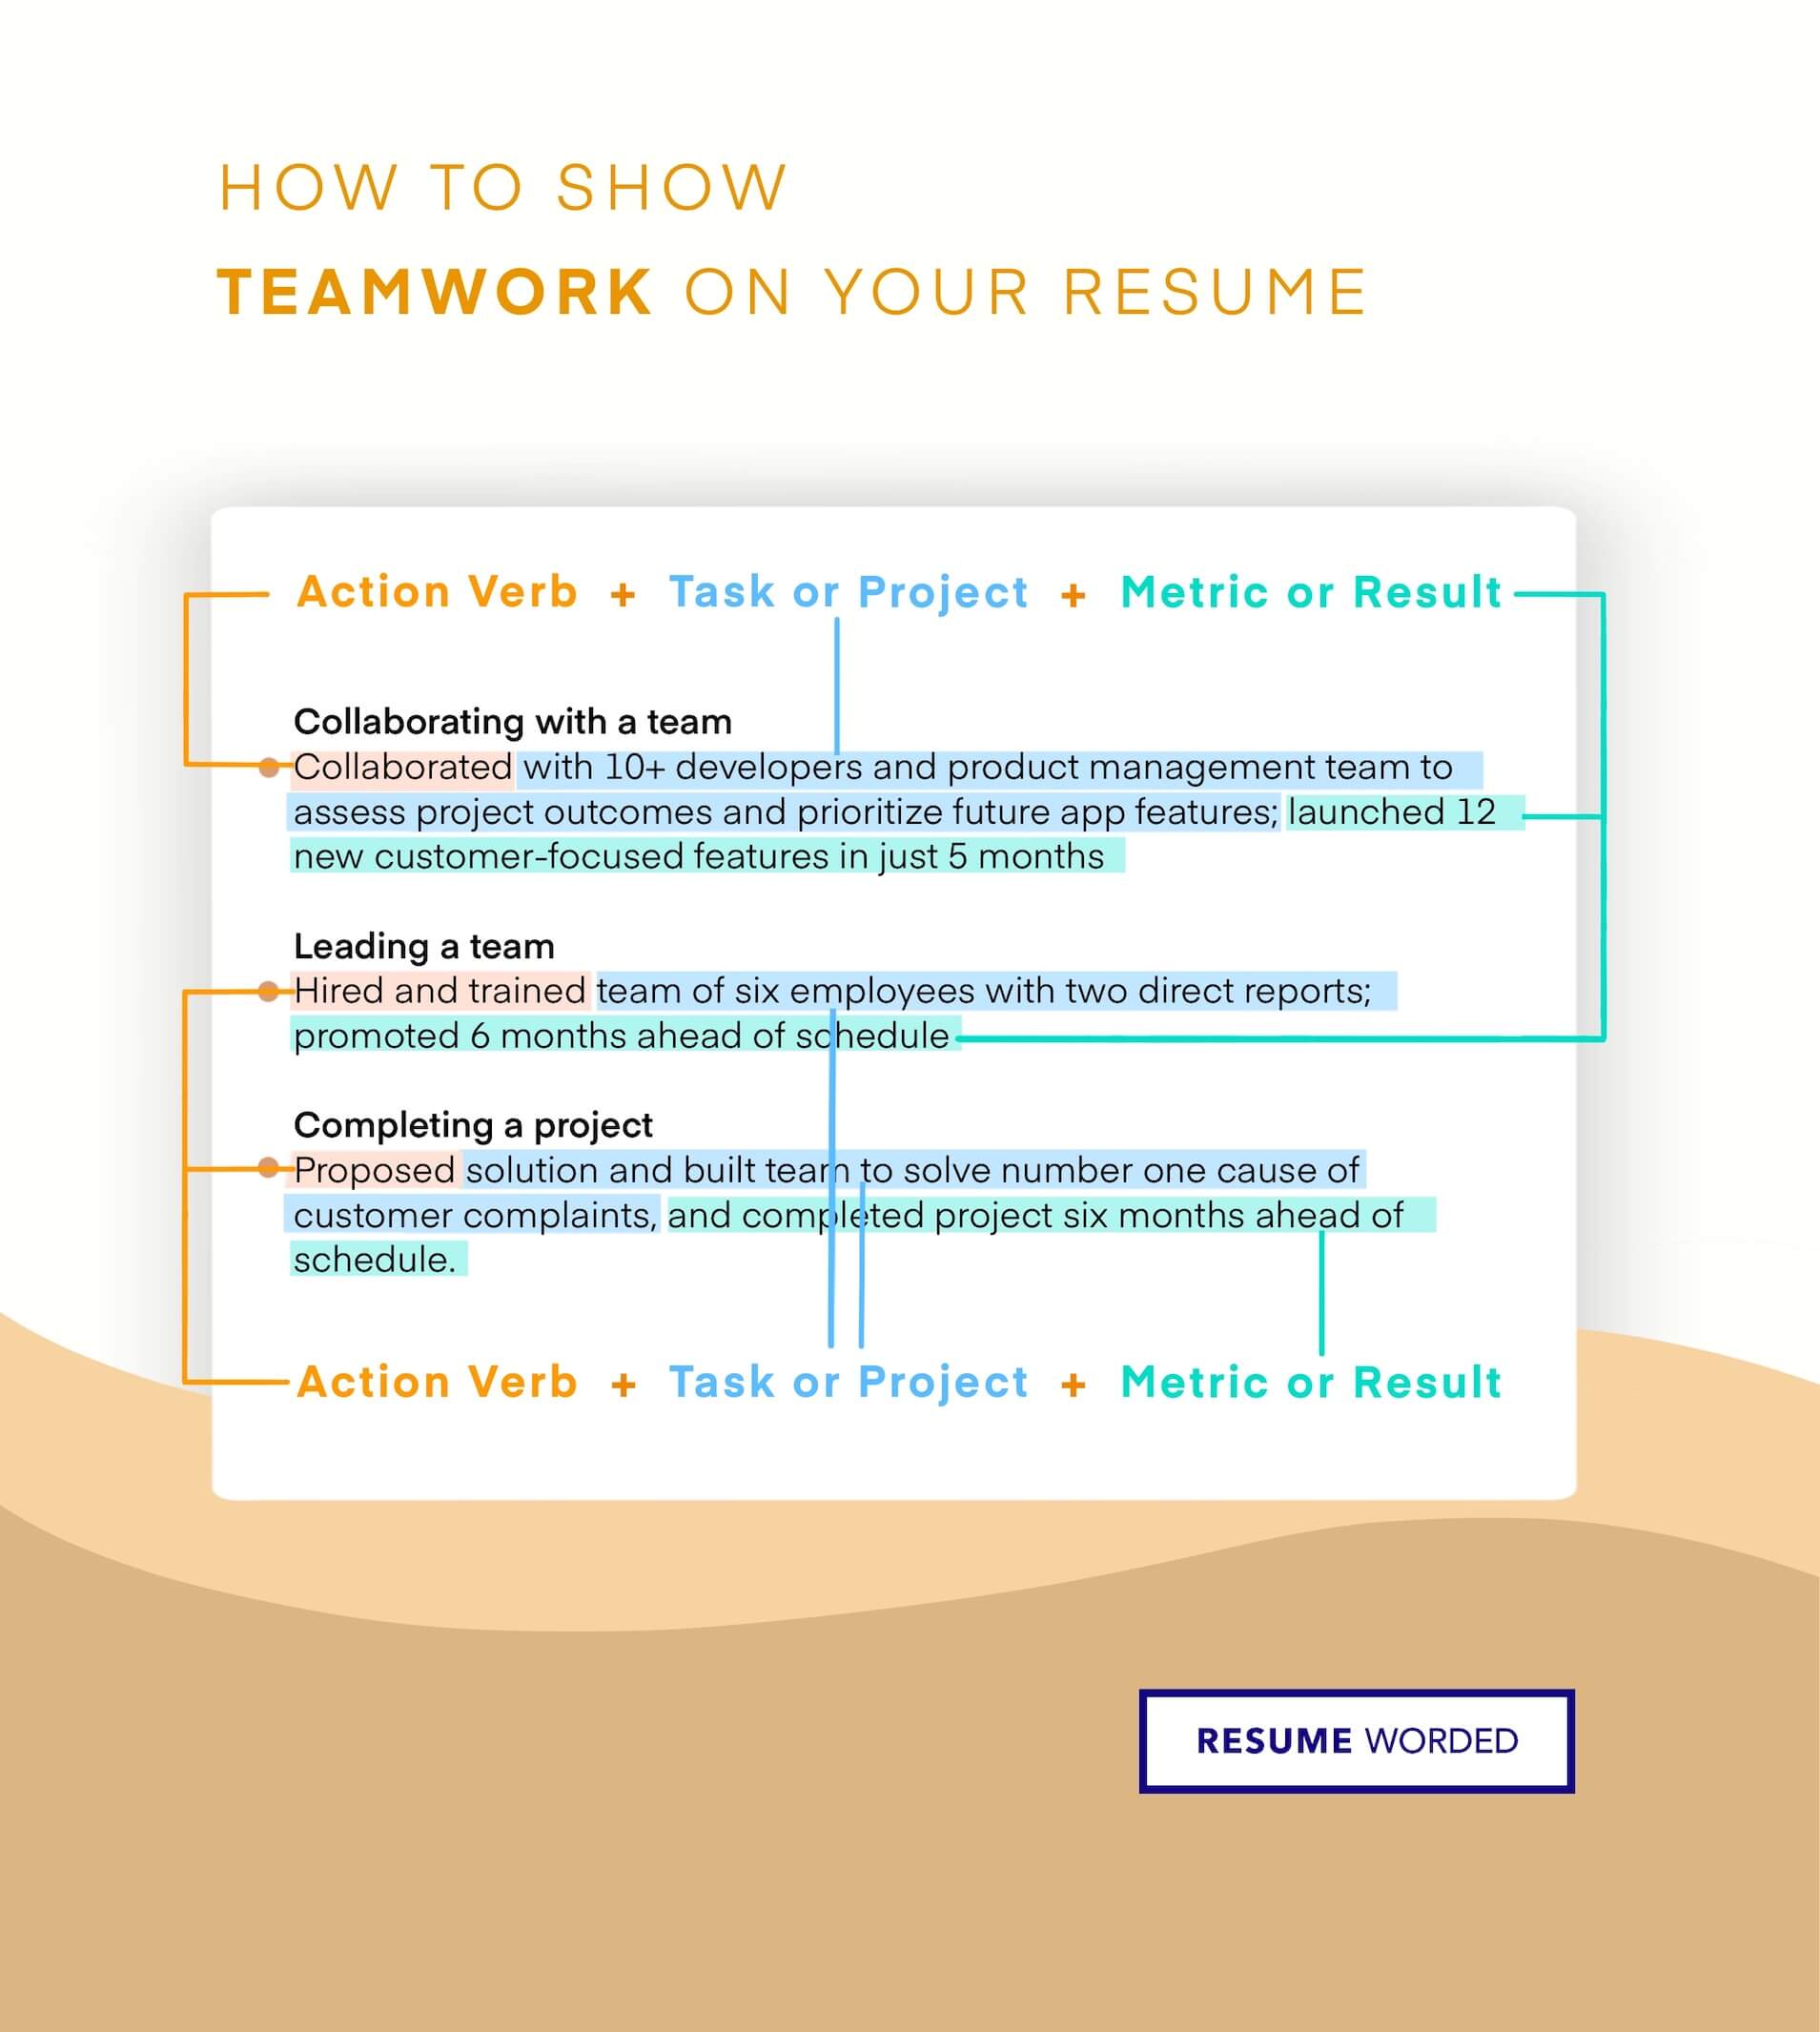 Exhibit capabilities in managing distributed teams - Software Project Manager Resume